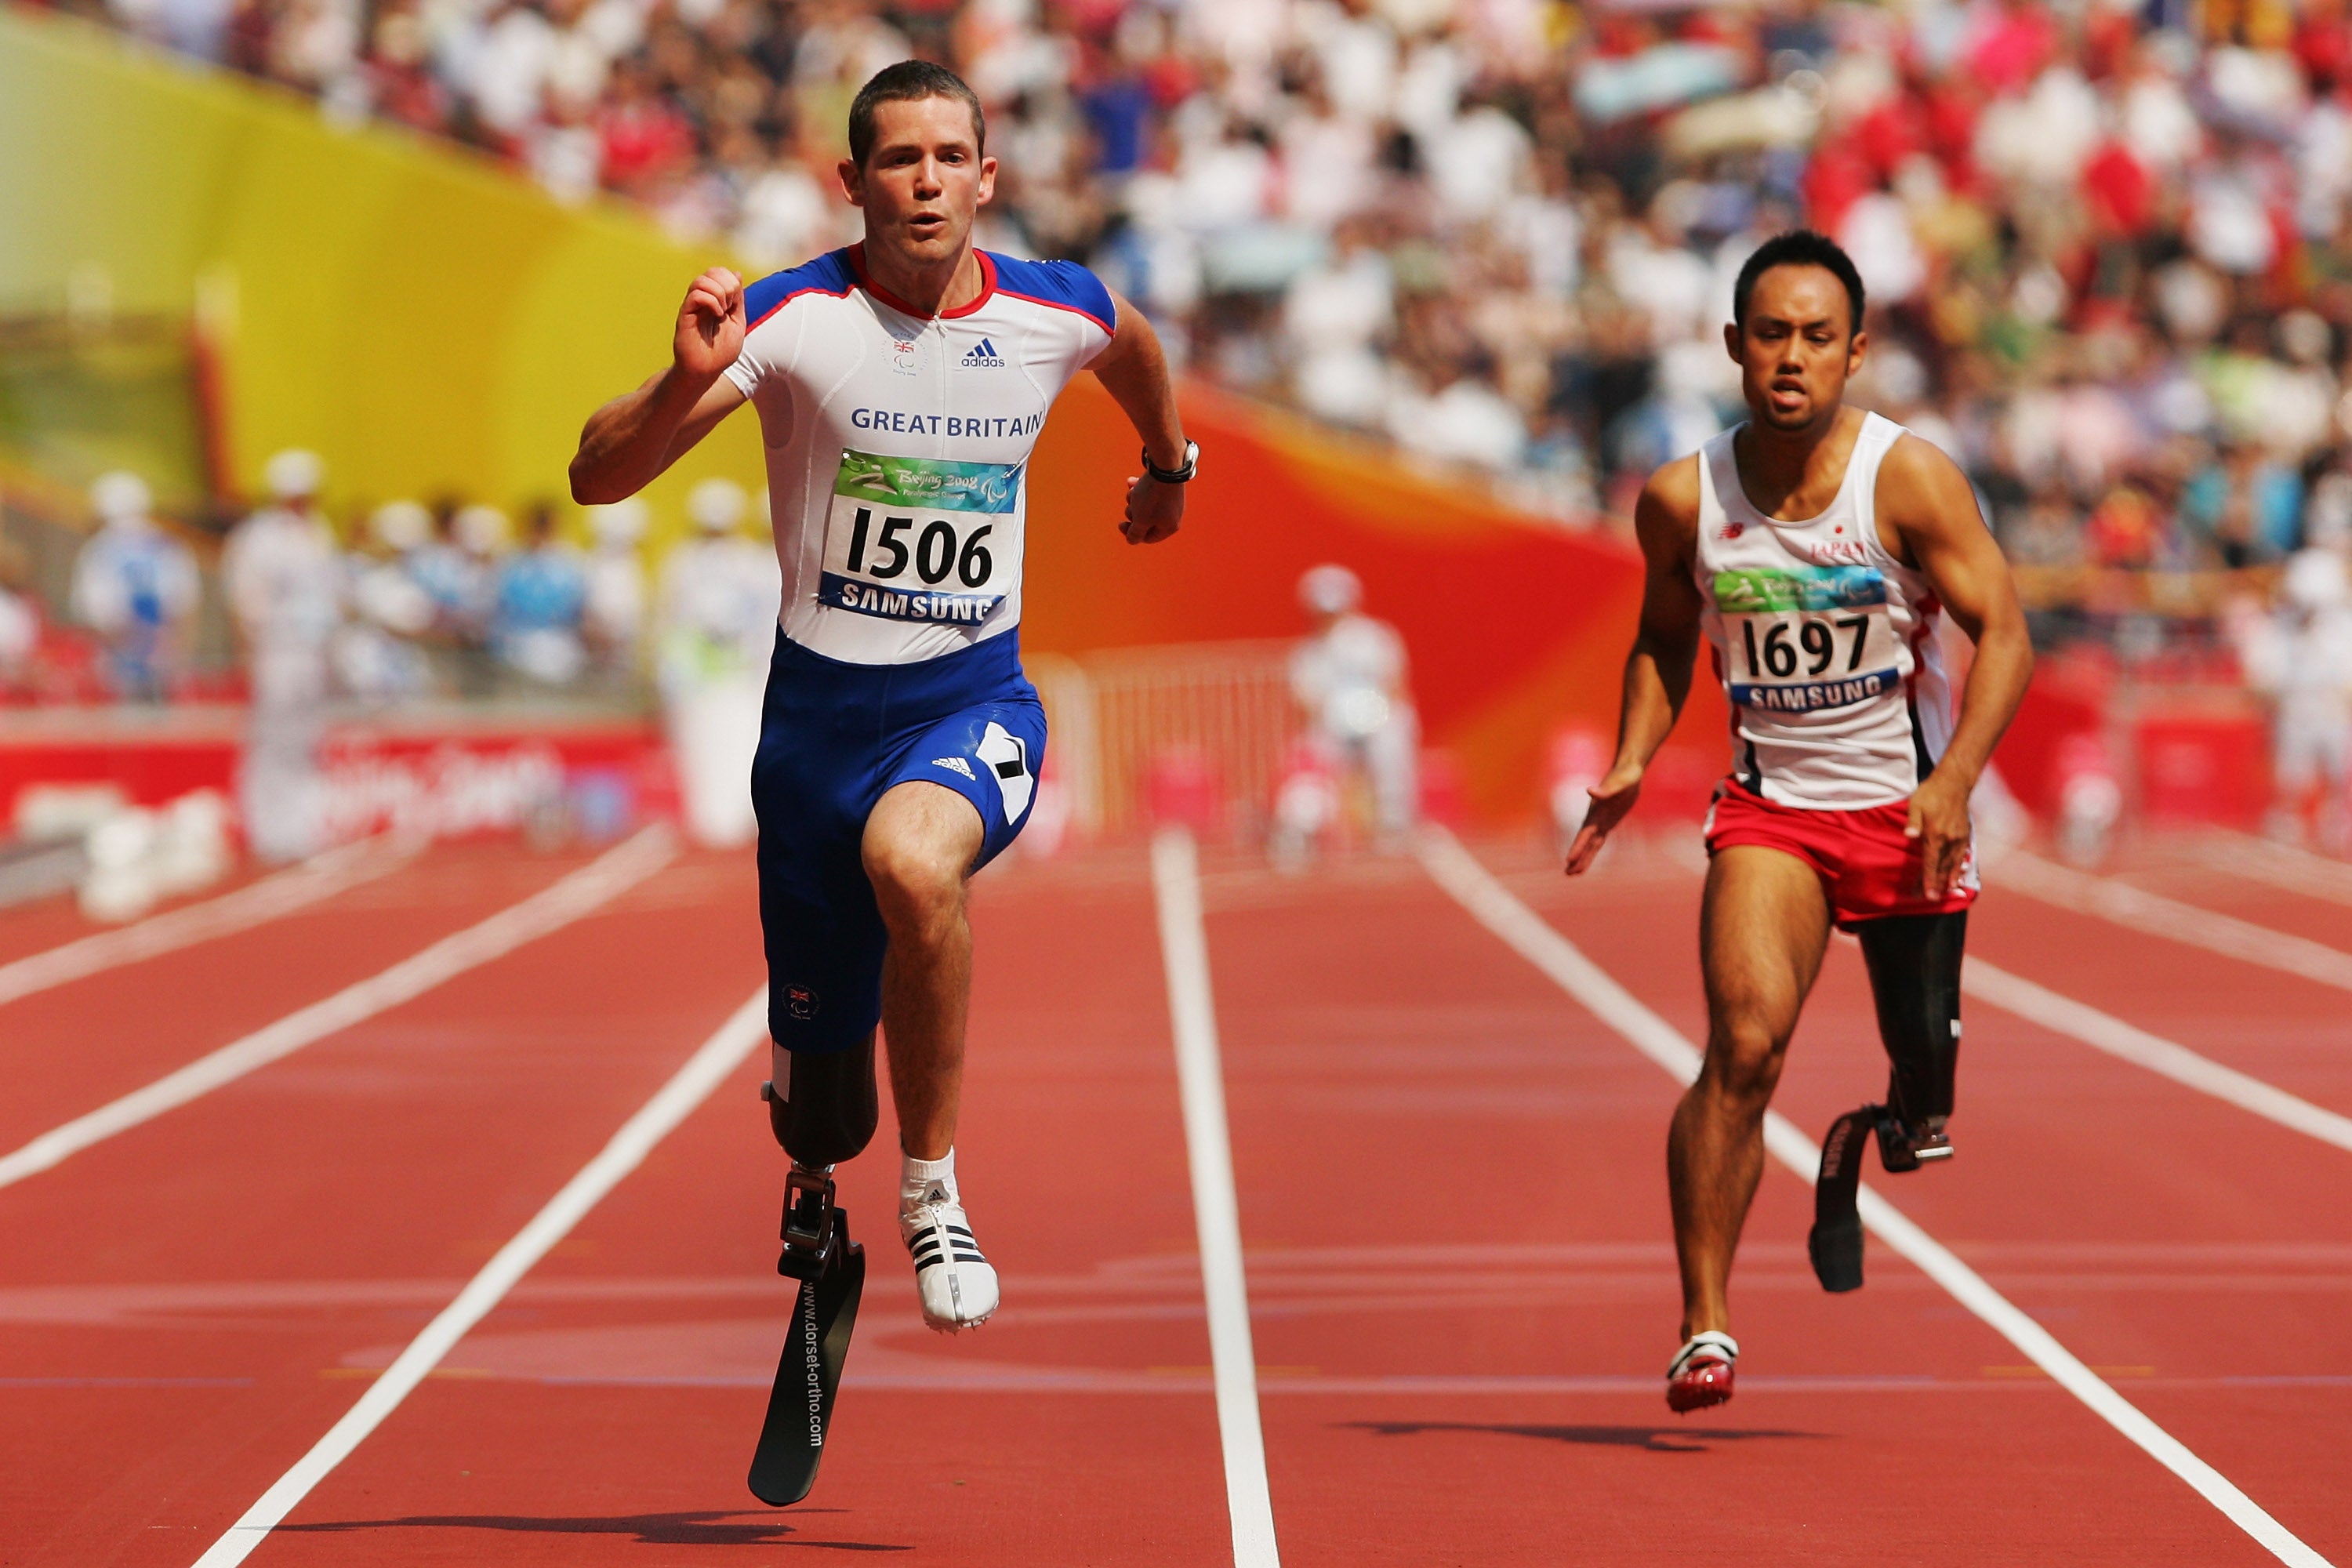 McFall in the Men’s T42 100m final at the 2008 Beijing Paralympics beside Japan’s Atsushi Yamamoto